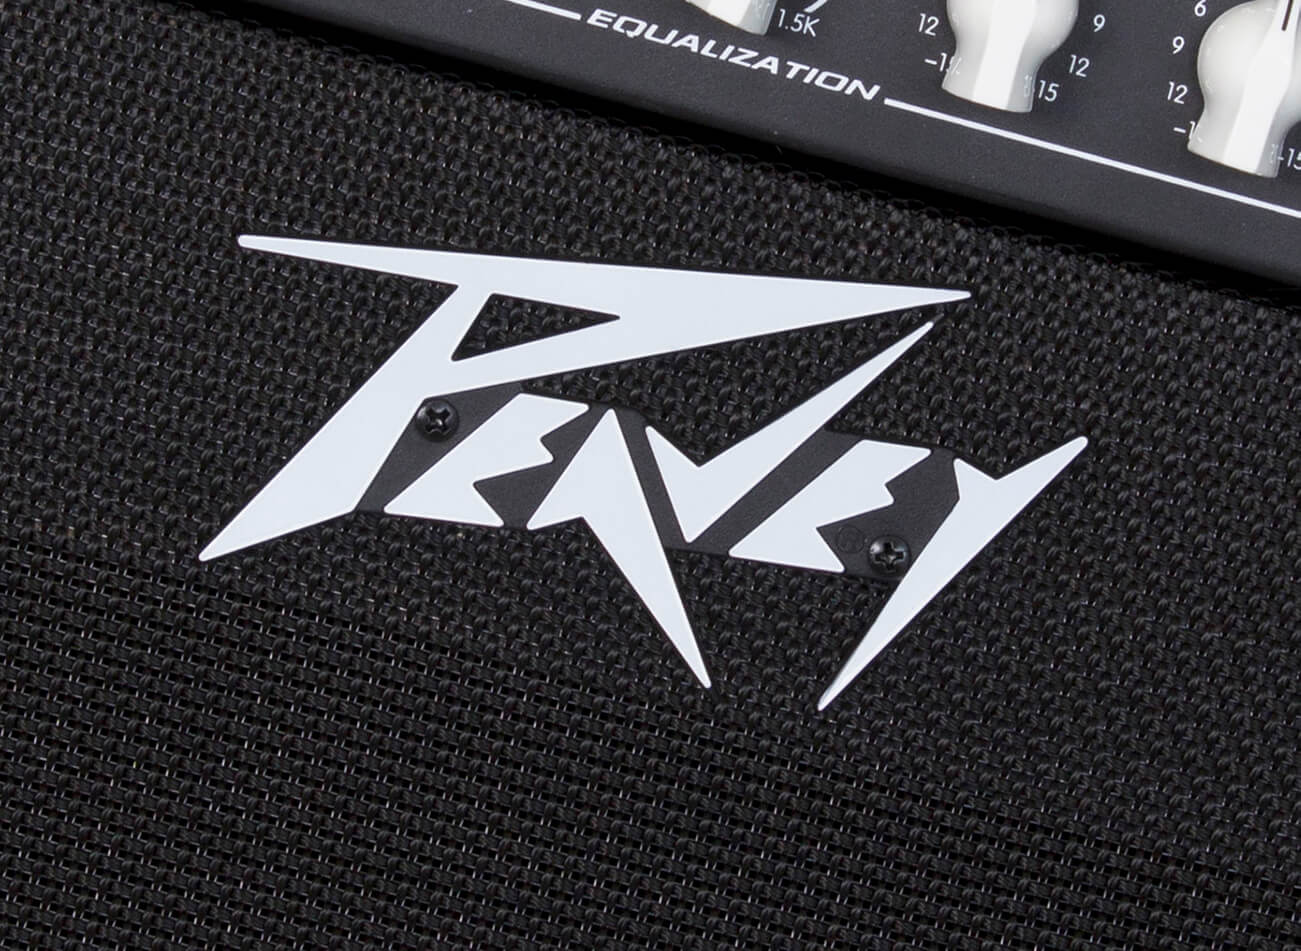 Peavey Logo - Peavey to auction off $12 million worth of old unsold guitars, amps